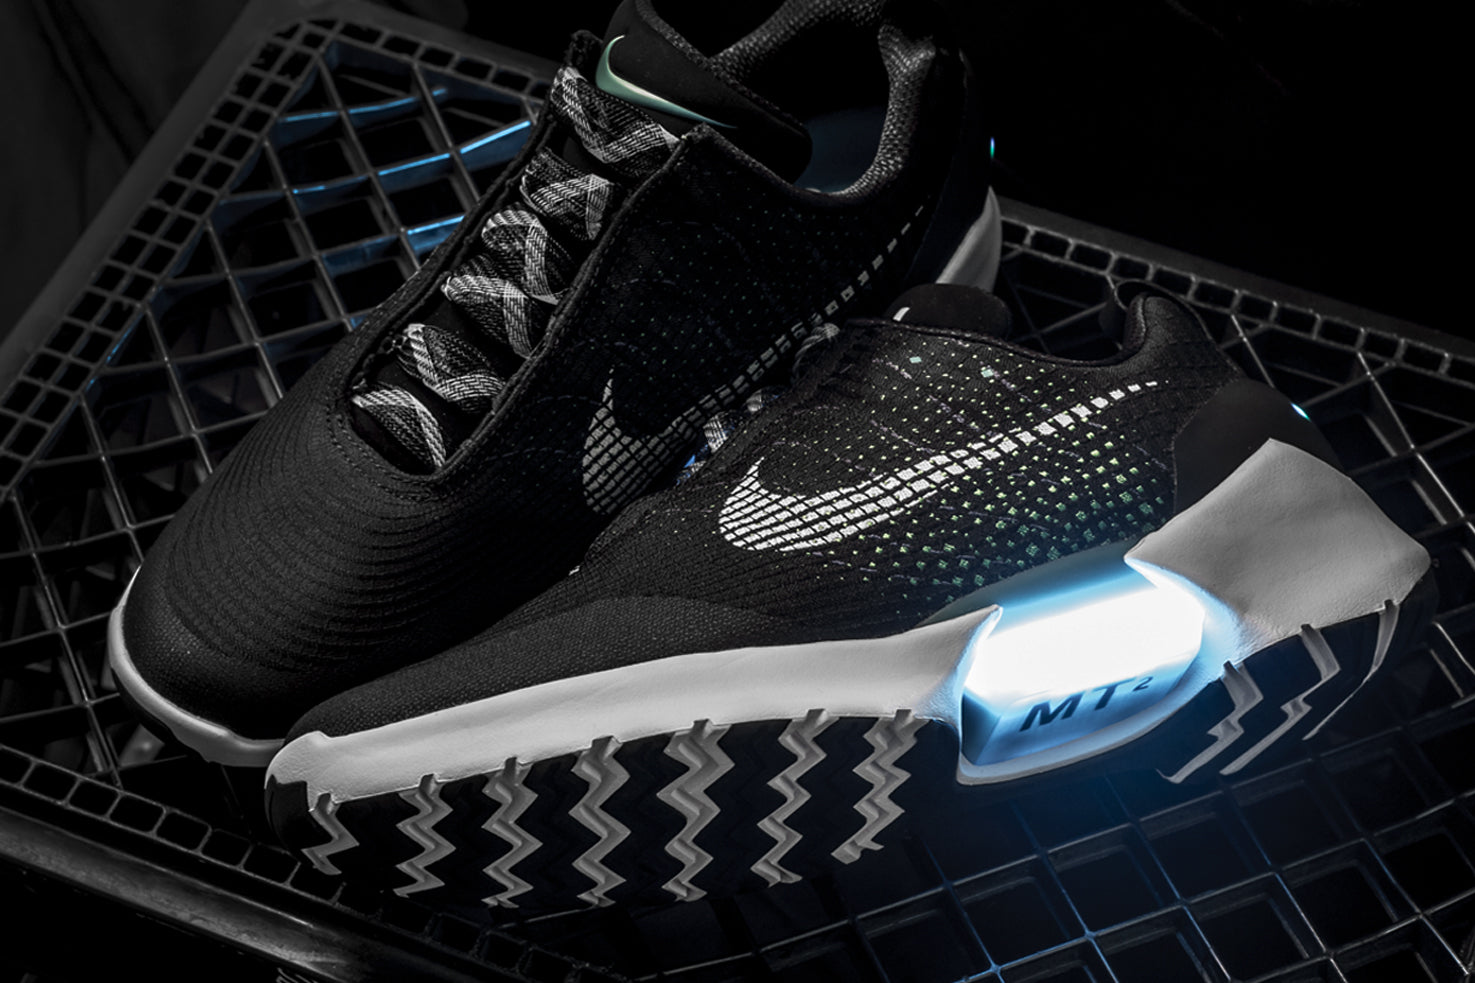 NIKE HYPERADAPT 1.0 / POWERED BY E.A.R.L. TECHNOLOGY – BLENDS